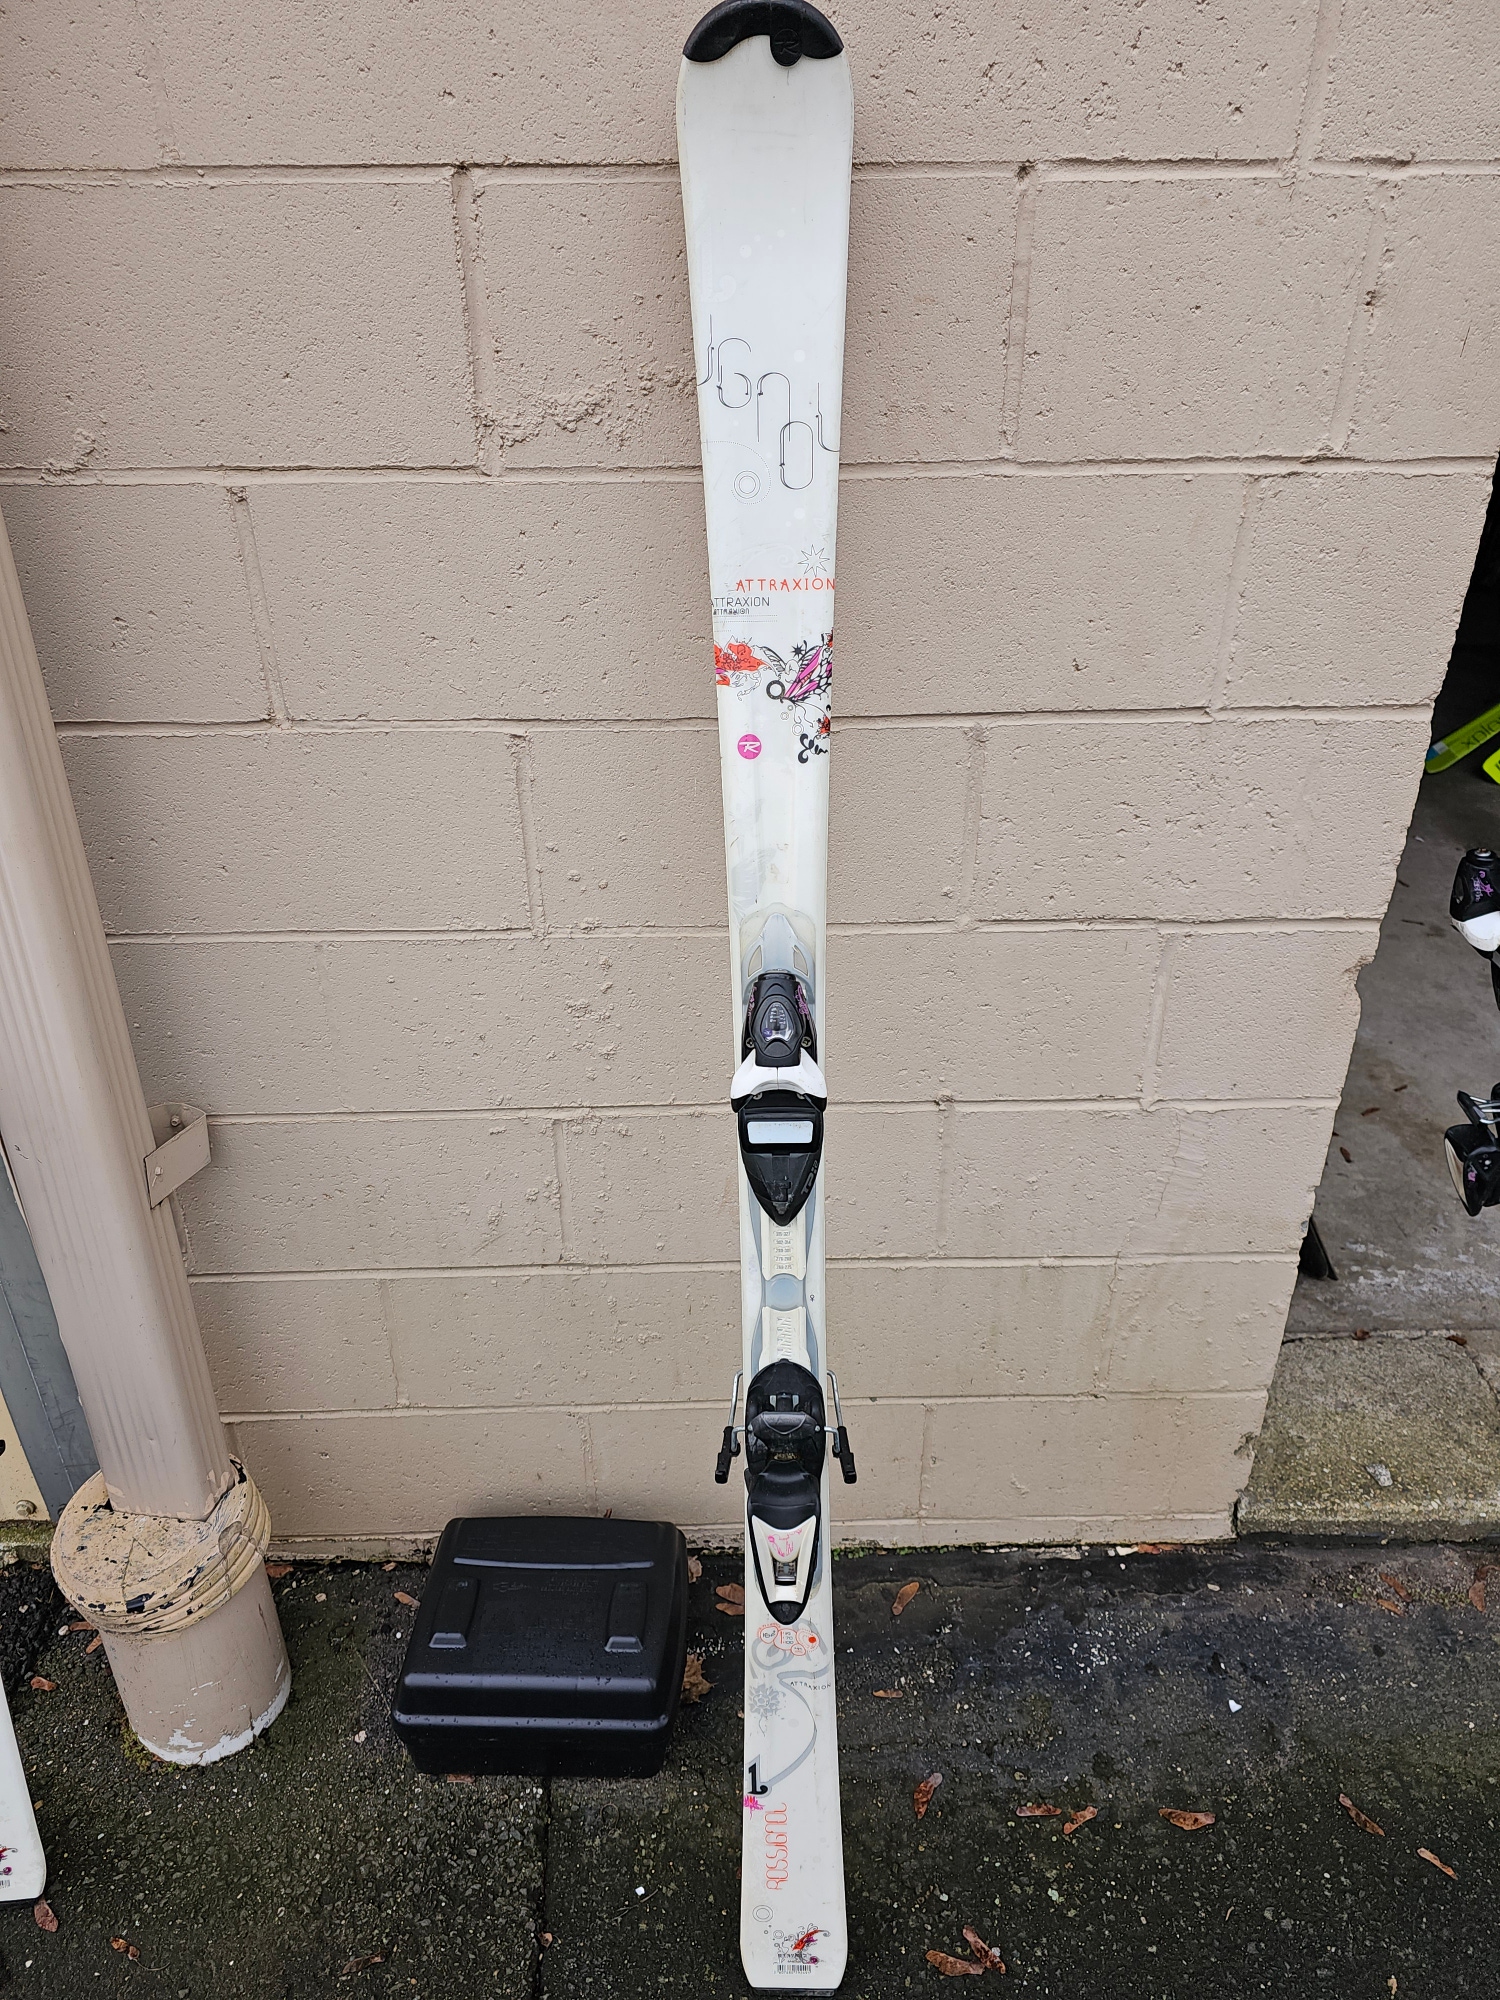 Used 2010 Rossignol 162 cm All Mountain Attraxion Skis With Bindings Max Din 10